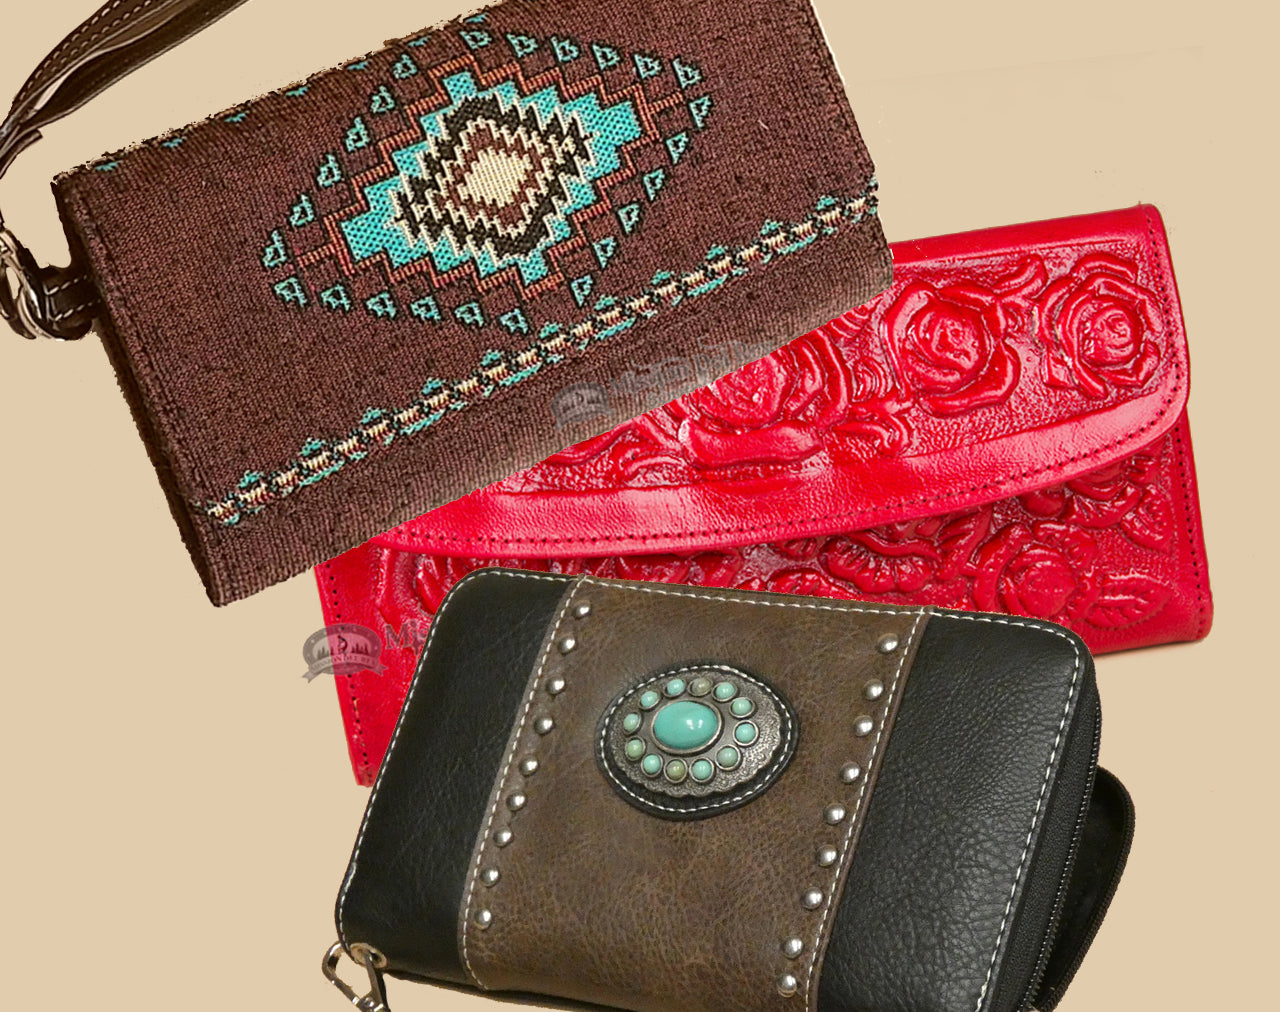 Elevate your style with our chic collection of <strong>wallets and bags</strong>.